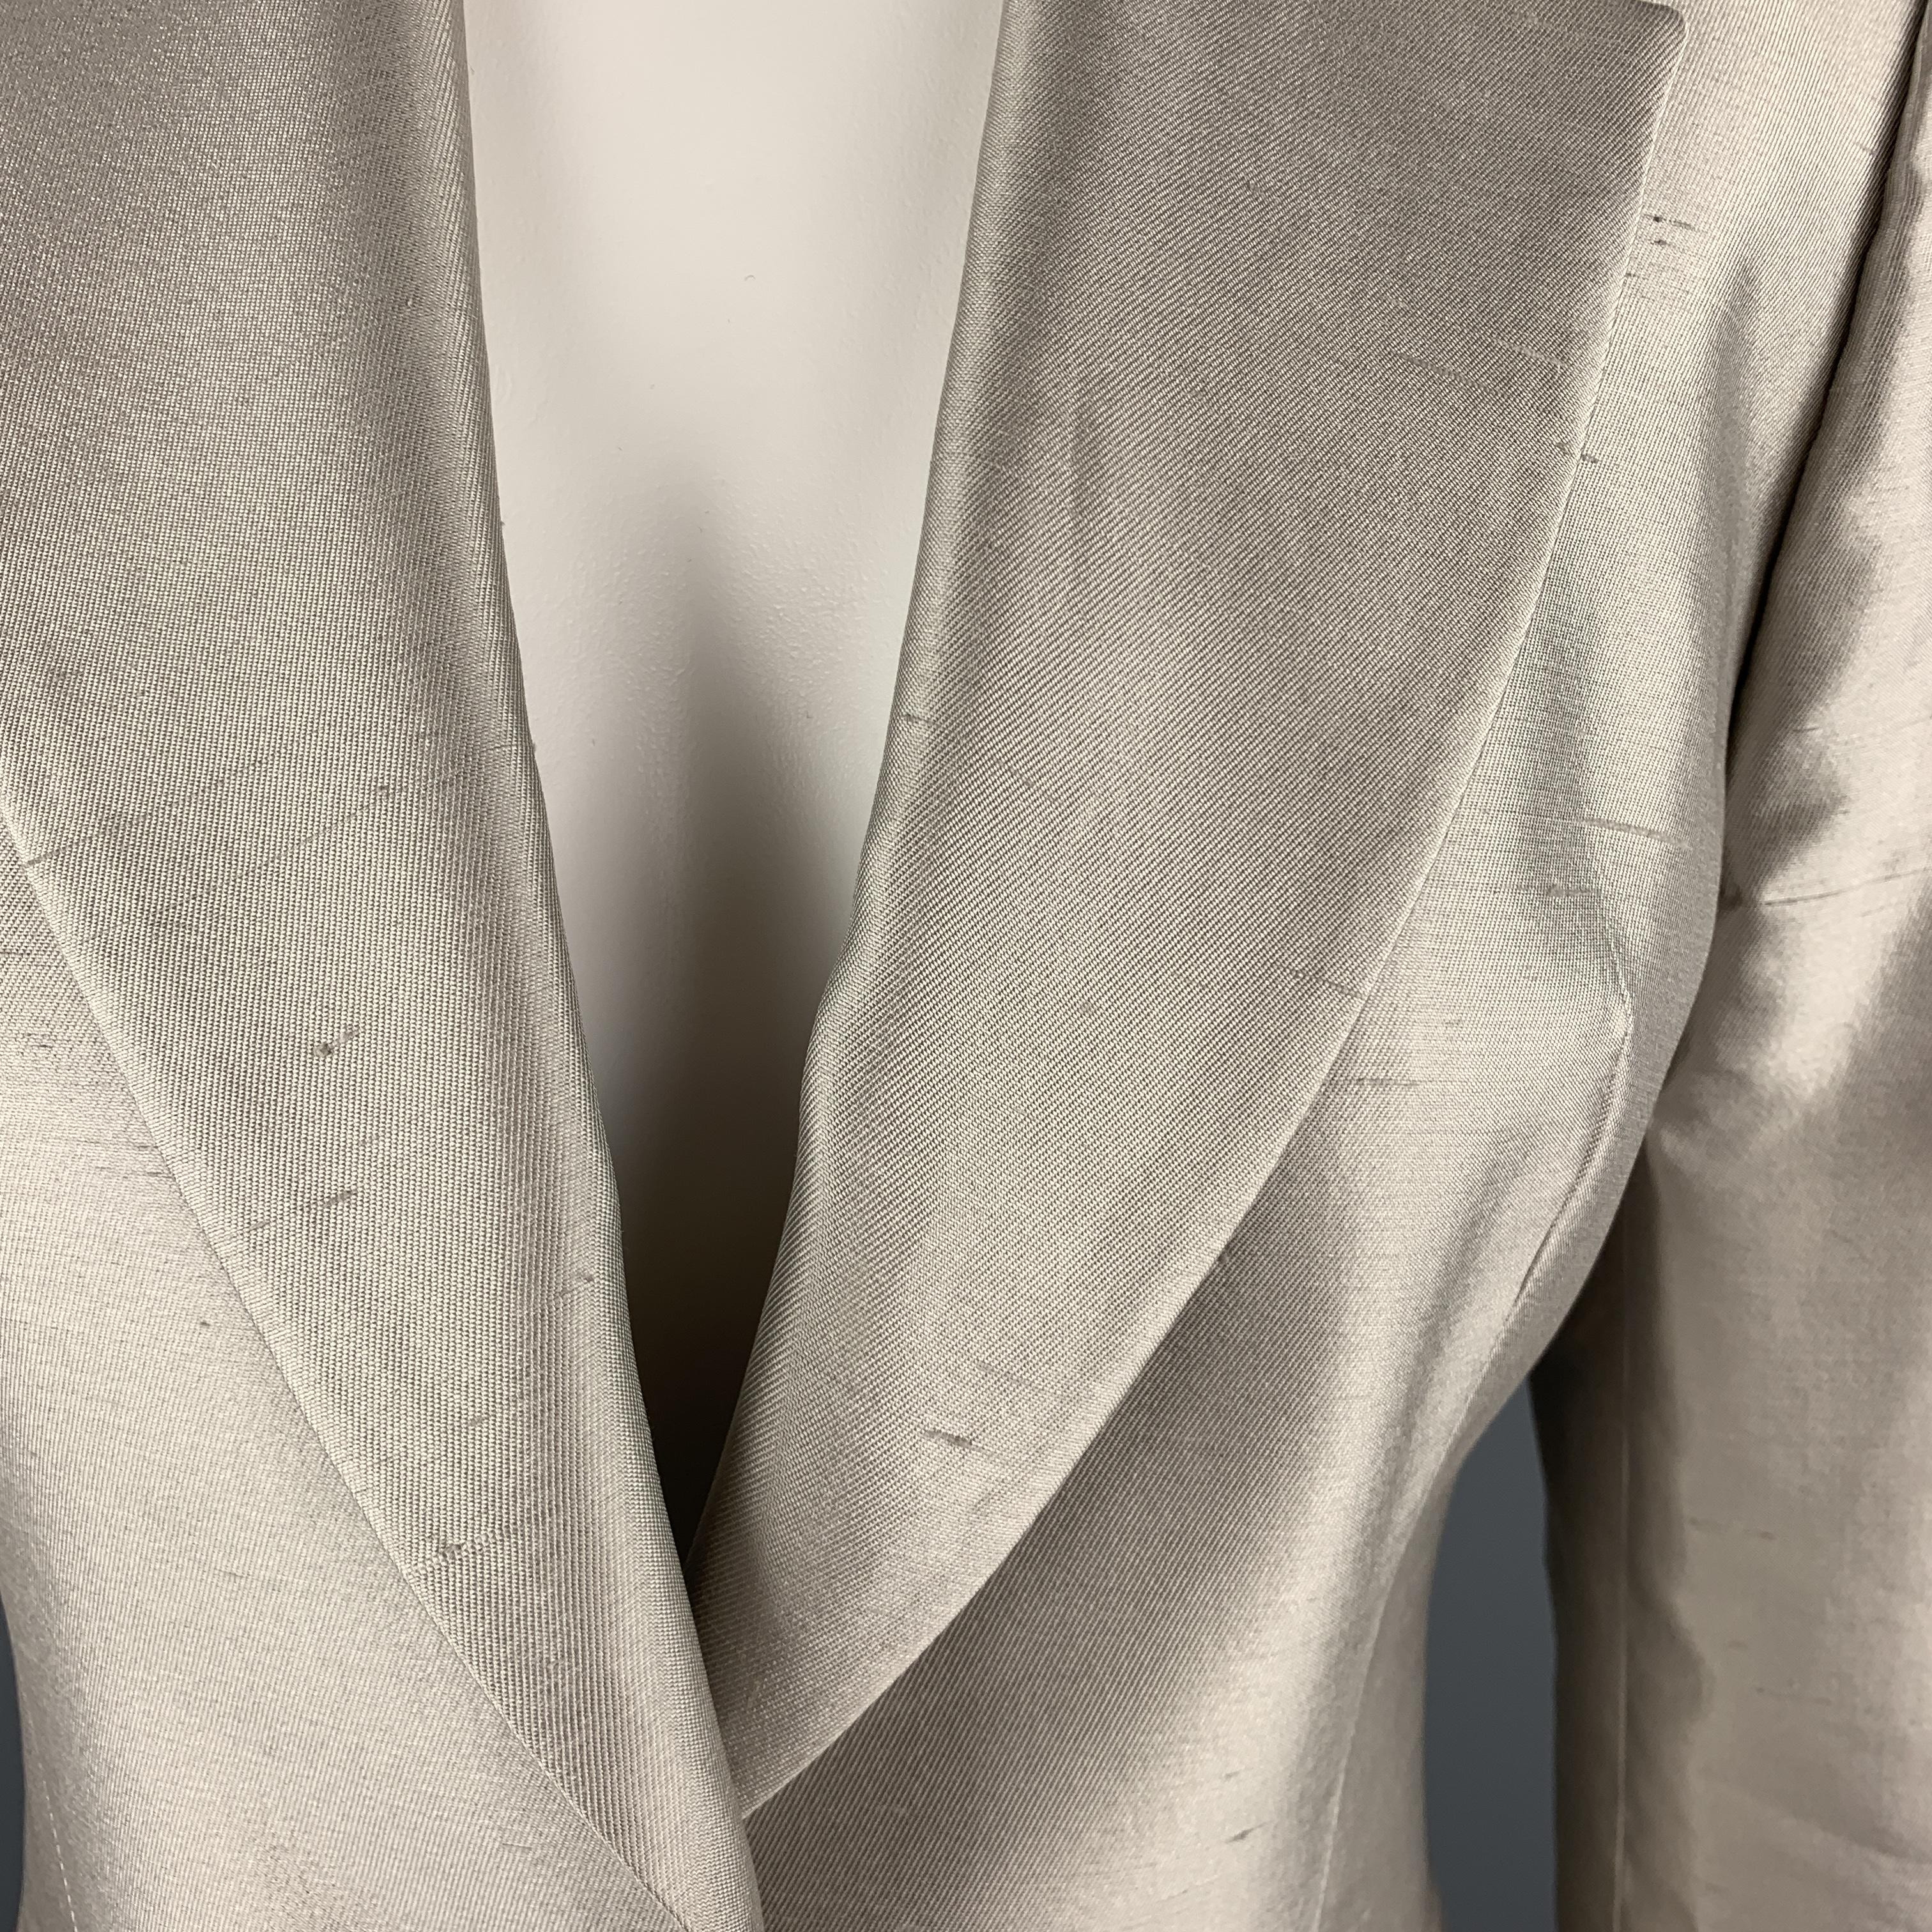 GIVENCHY blazer comes in muted silver silk shangtung with a notch lapel, single button front, cropped hem, and silver tone metal button detailed cuffs. Spot by button. As-is. Made in France.

Good Pre-Owned Condition.
Marked: FR